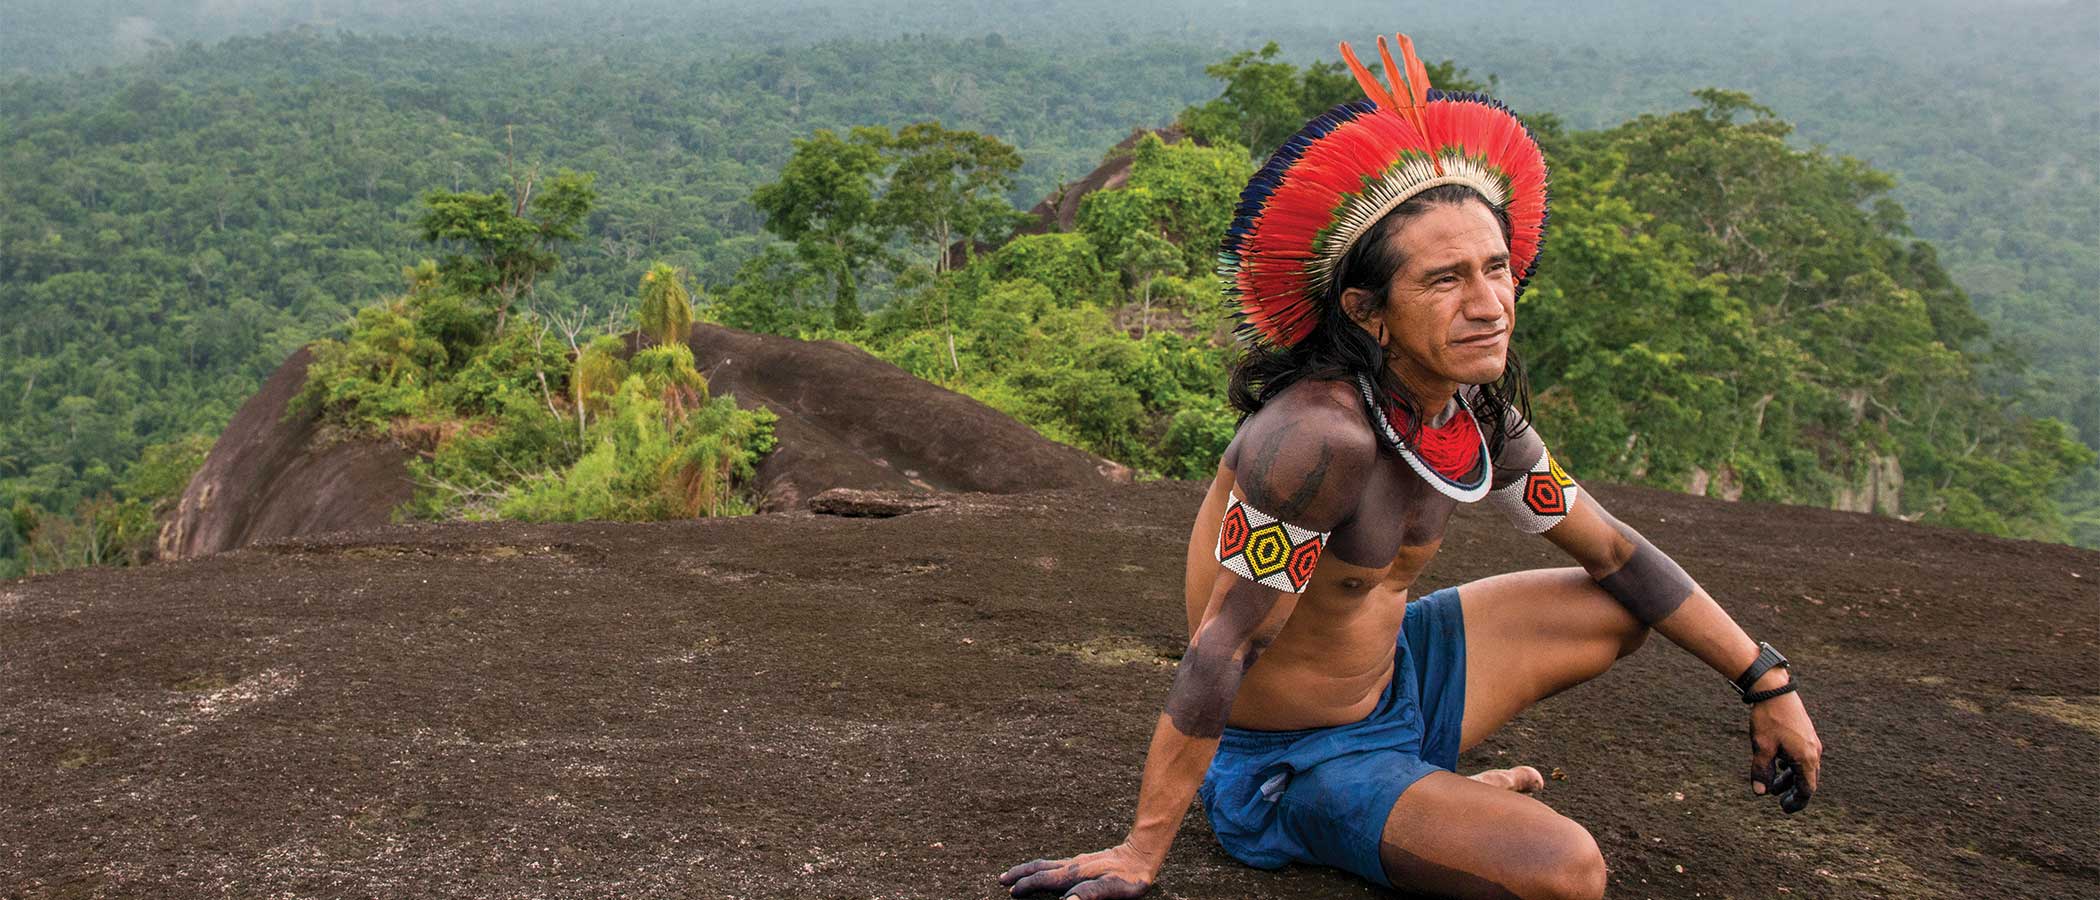 A Kayapo man seated on a mountain top overlooking forest in the Amazon.